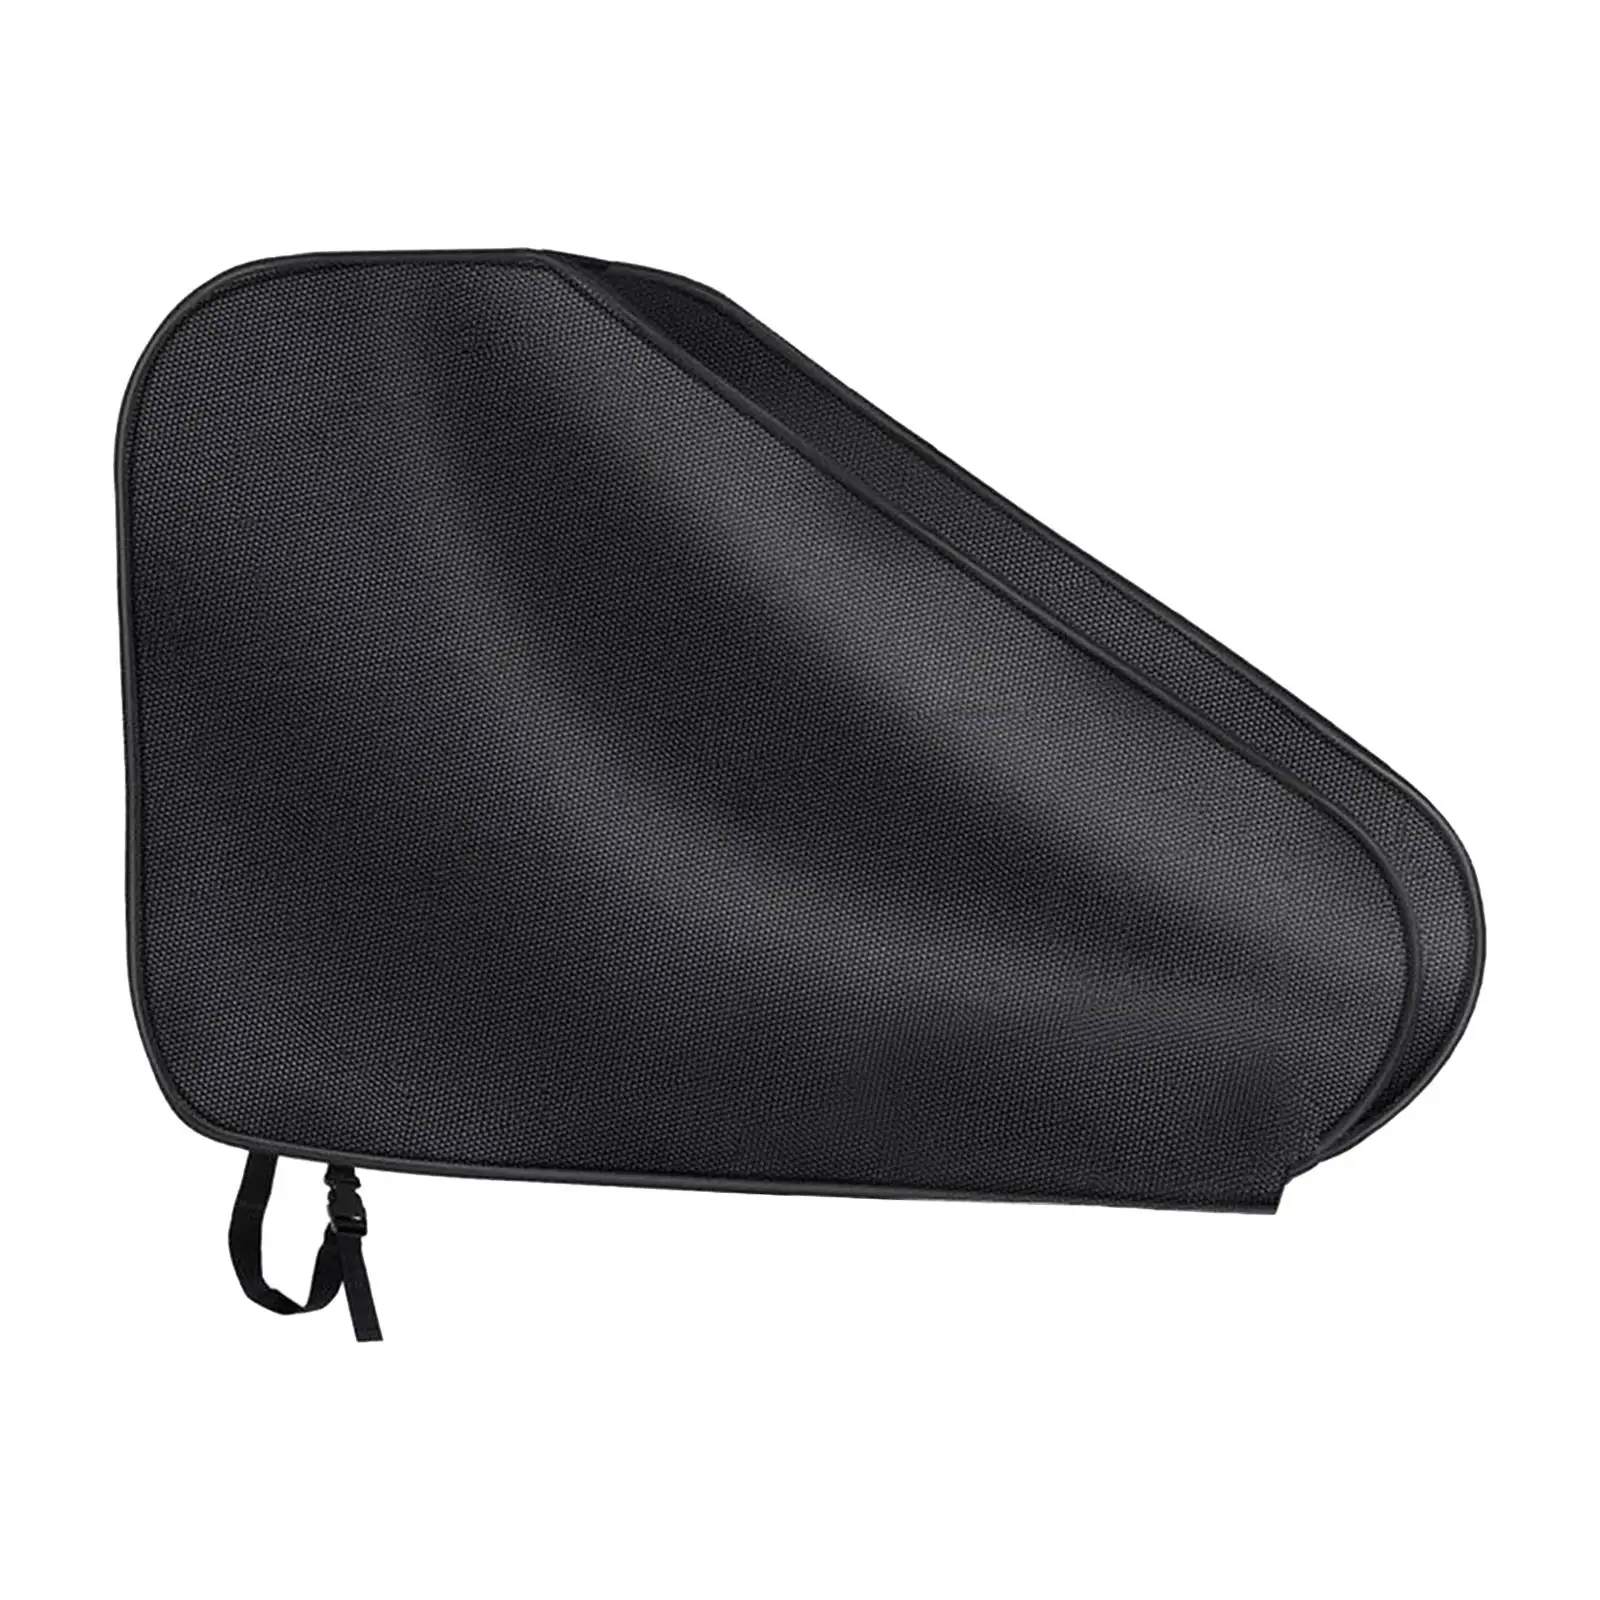 Caravan Hitch Cover Breathable Waterproof RV Caravan Trailer Tow Hitch Cover